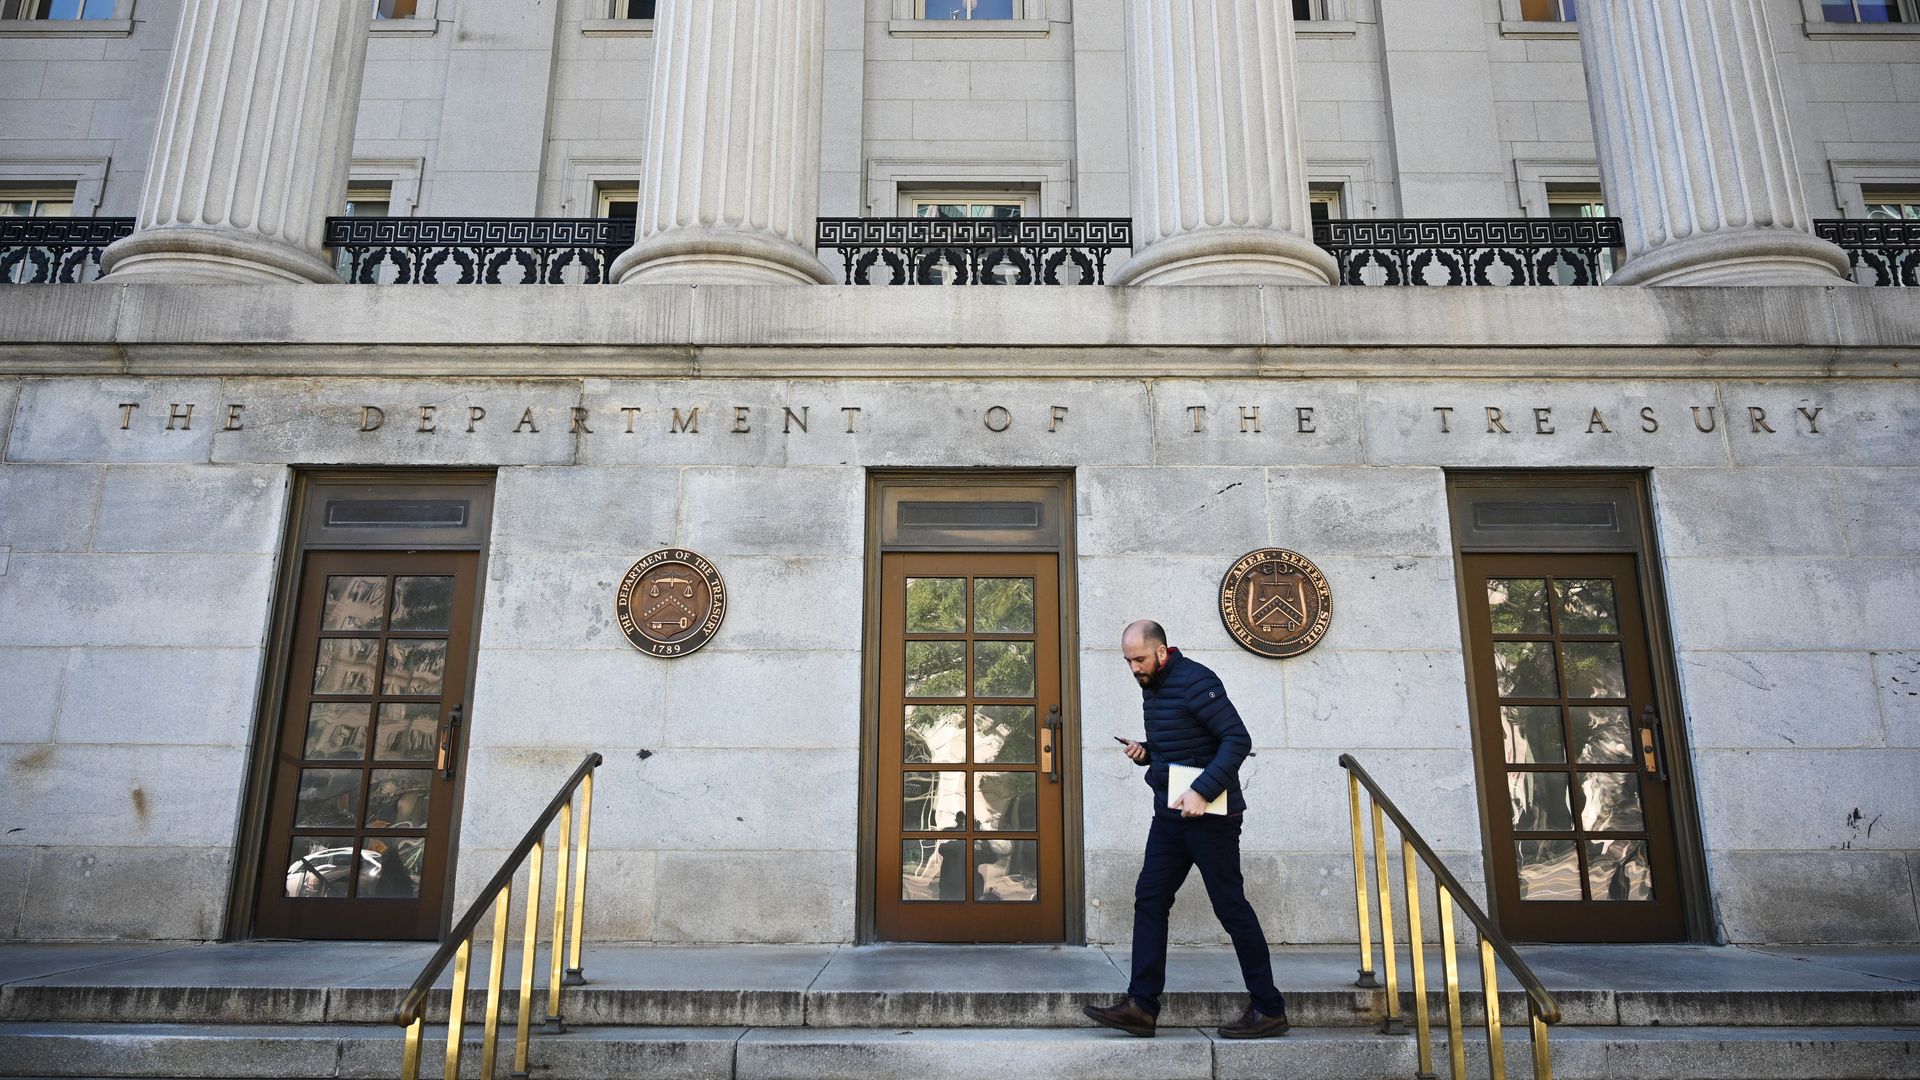 In this image, a man carrying a file walks down the front steps of the Department of Treasury building.